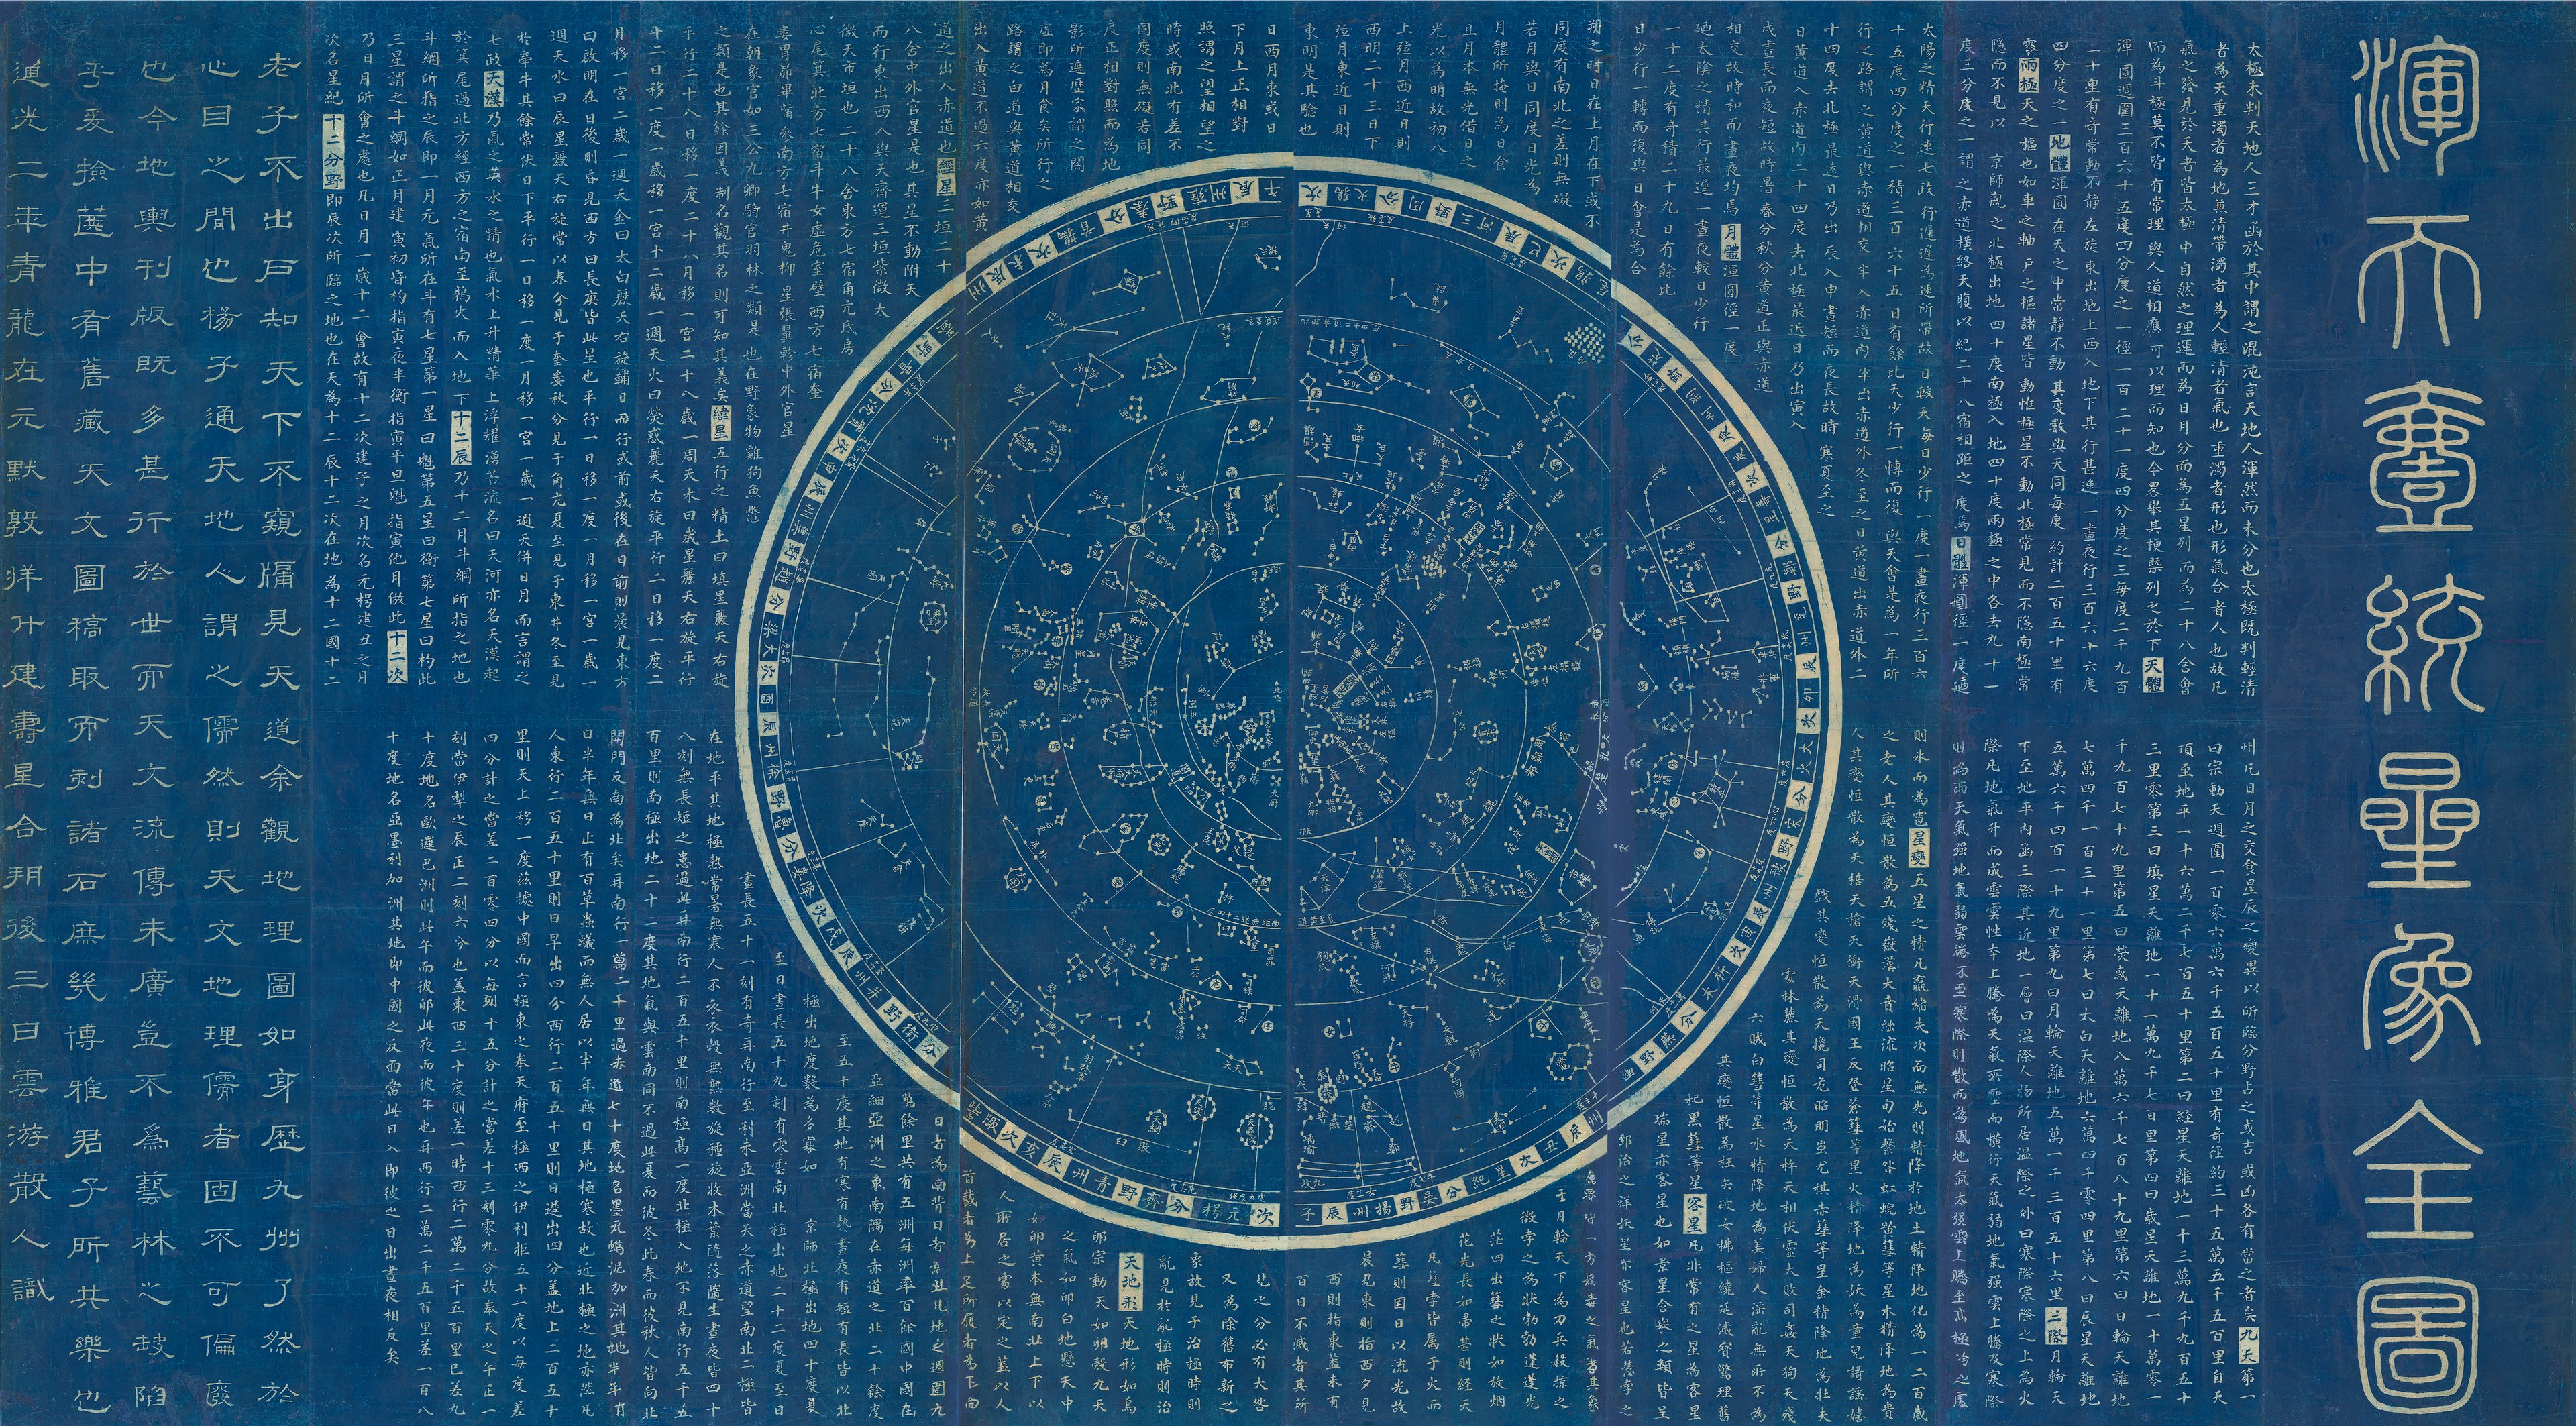 A preview of Huang Shang's Star Chart, depicting a sphere of stars & constellations on a blue background